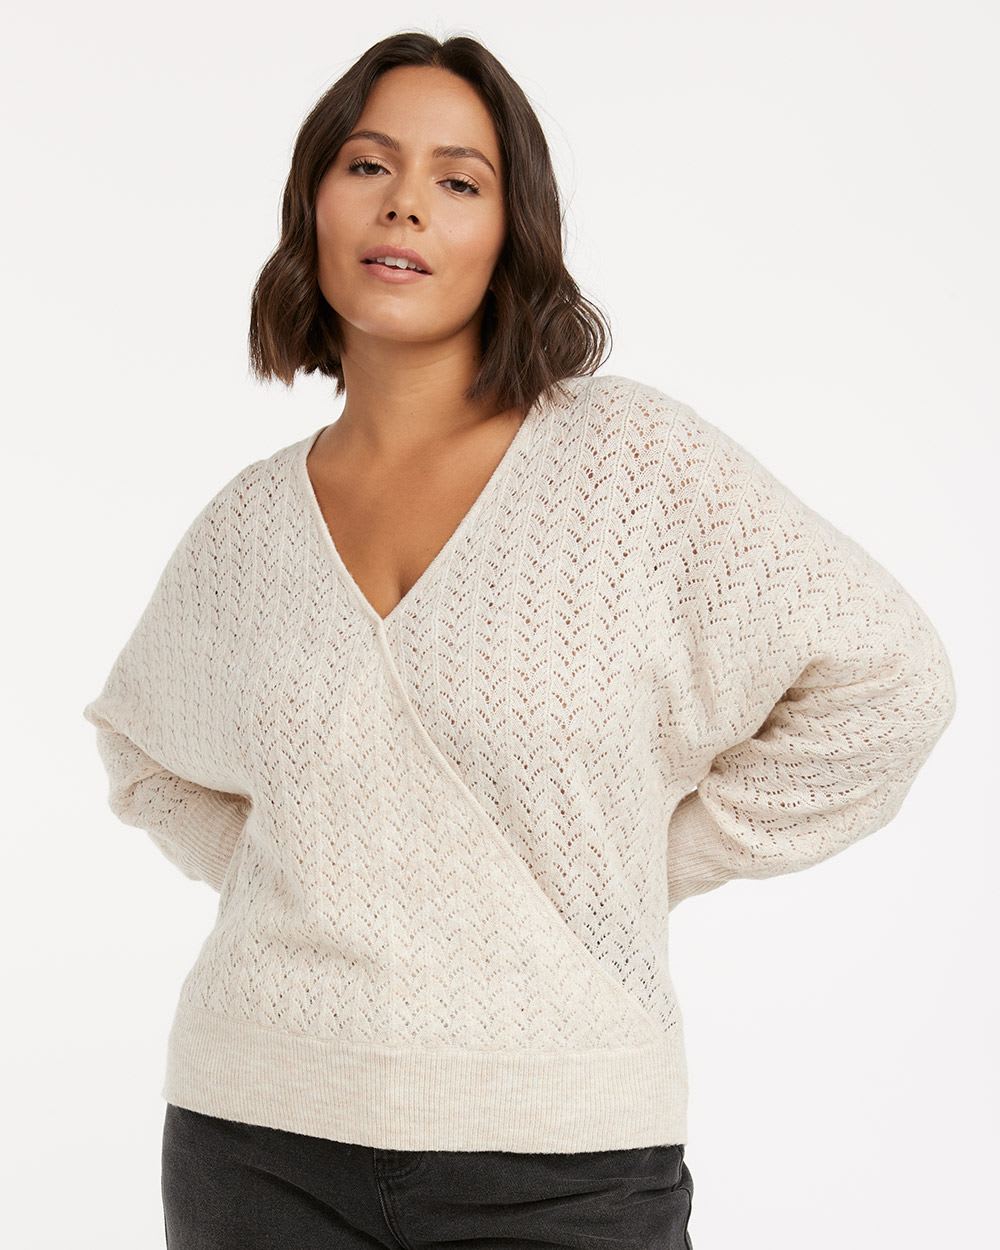 Long-Sleeve Wrap Pullover with Pointelle Stitches